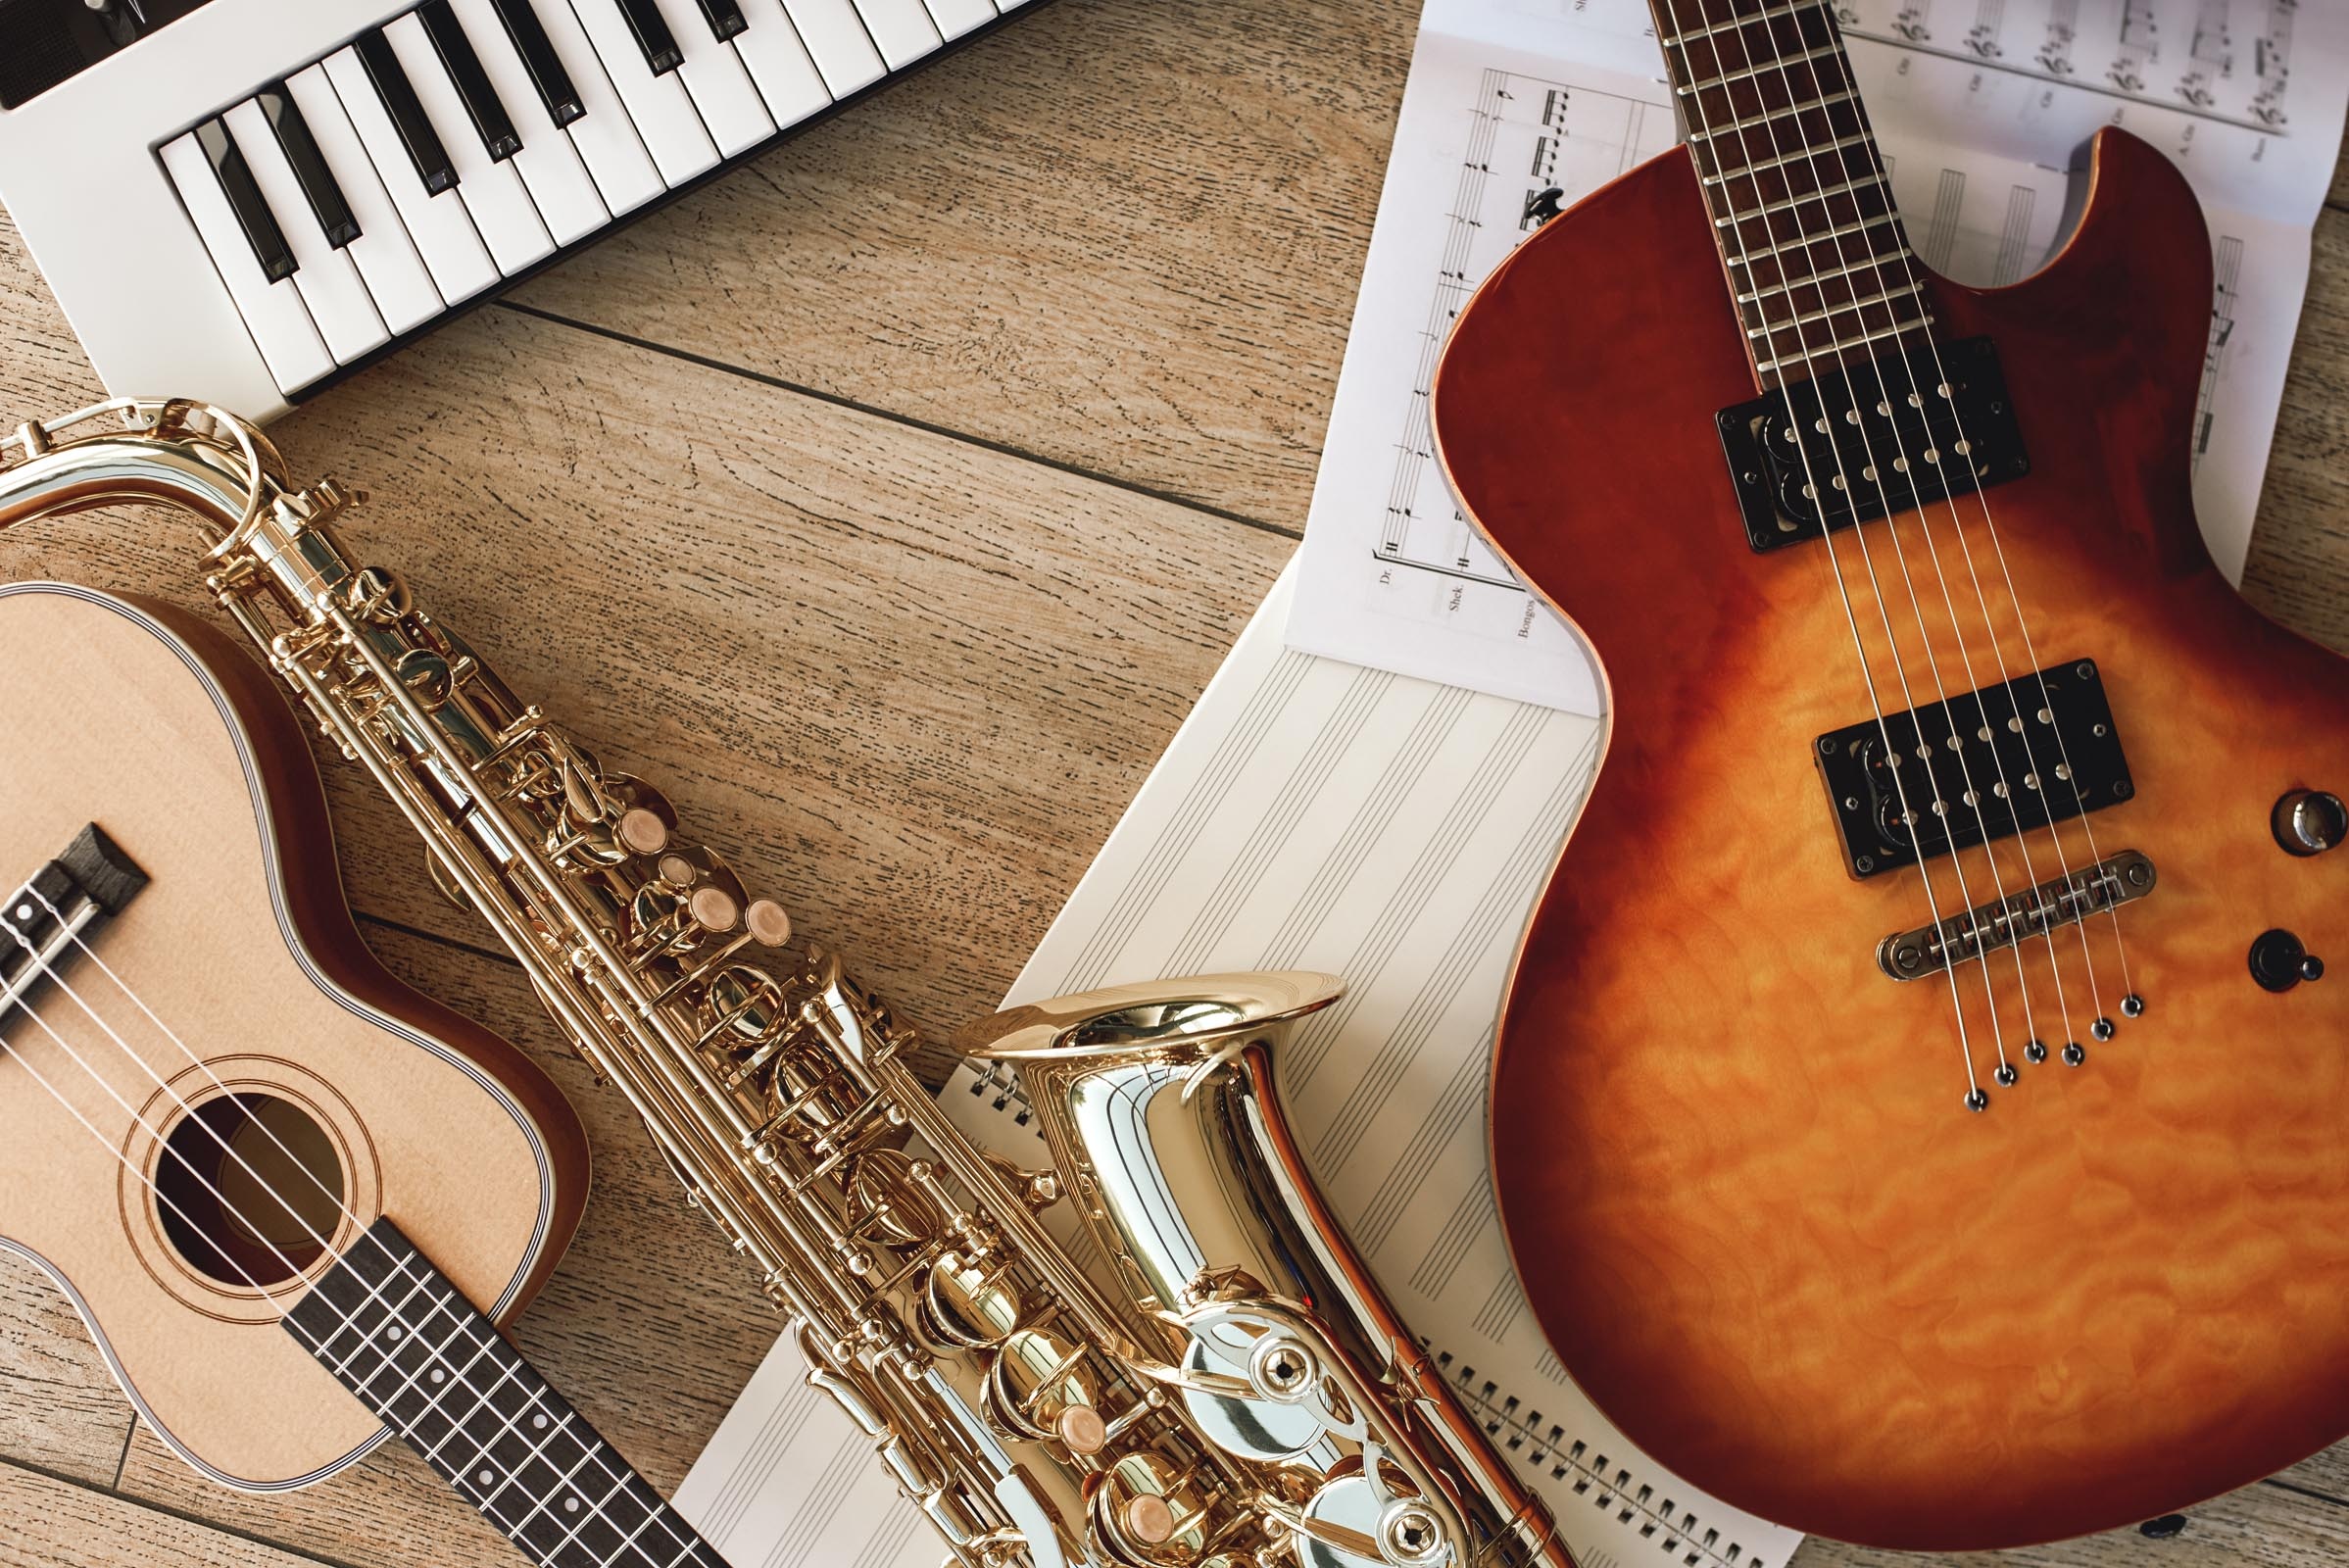 Musical Instruments: Electric guitar, Ukulele, Tenor saxophone, Instruments for the orchestra or ensemble. 2400x1600 HD Wallpaper.